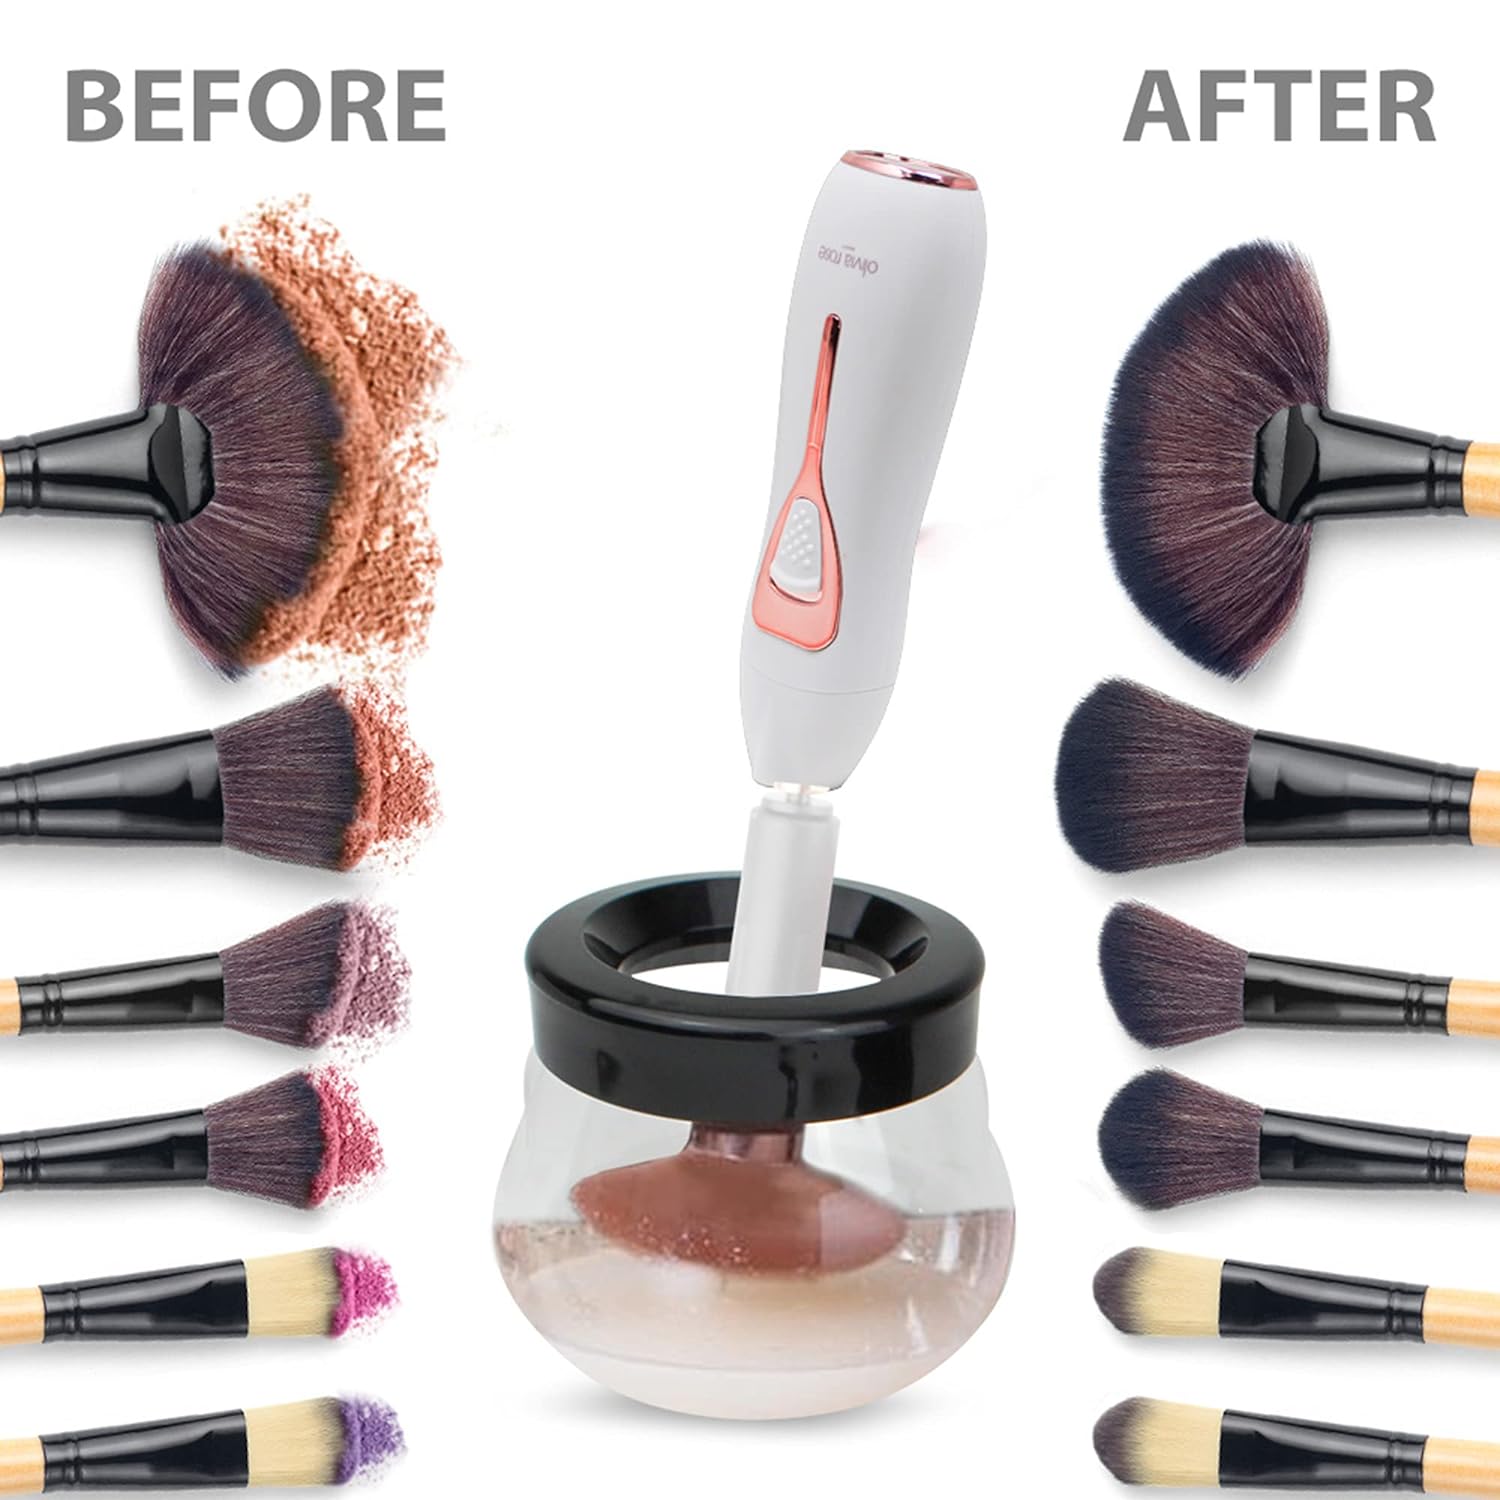 Olivia Rose Electric Makeup Brush Cleaner Spinner, Deep Cosmetic Makeup Brushes Cleaner with 8 Size Rubber Collars White/Rose Gold